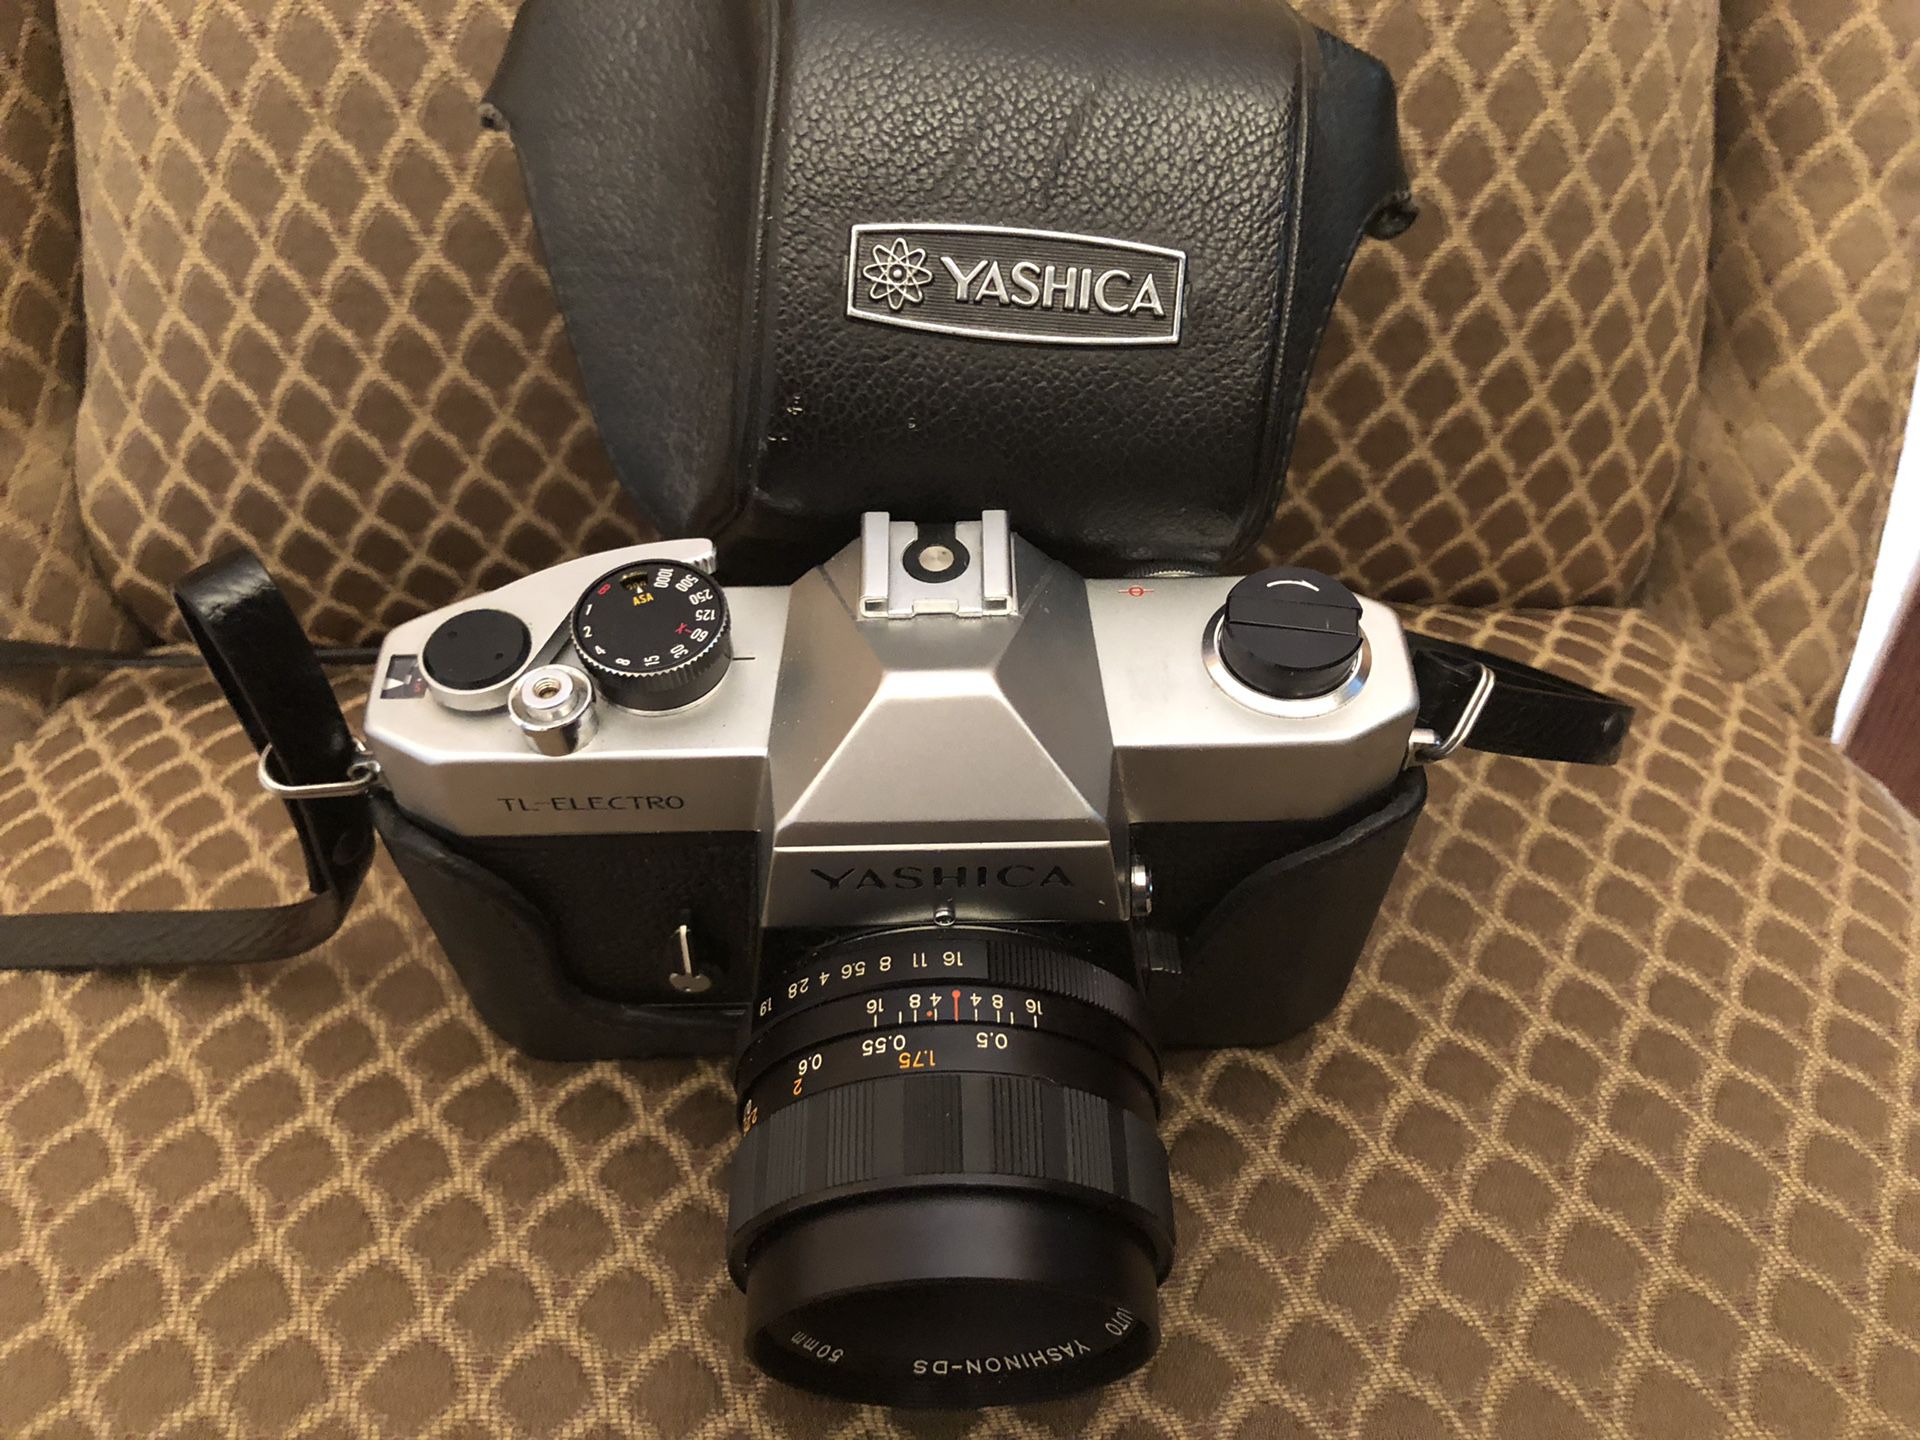 Yashica 35mm camera and lens